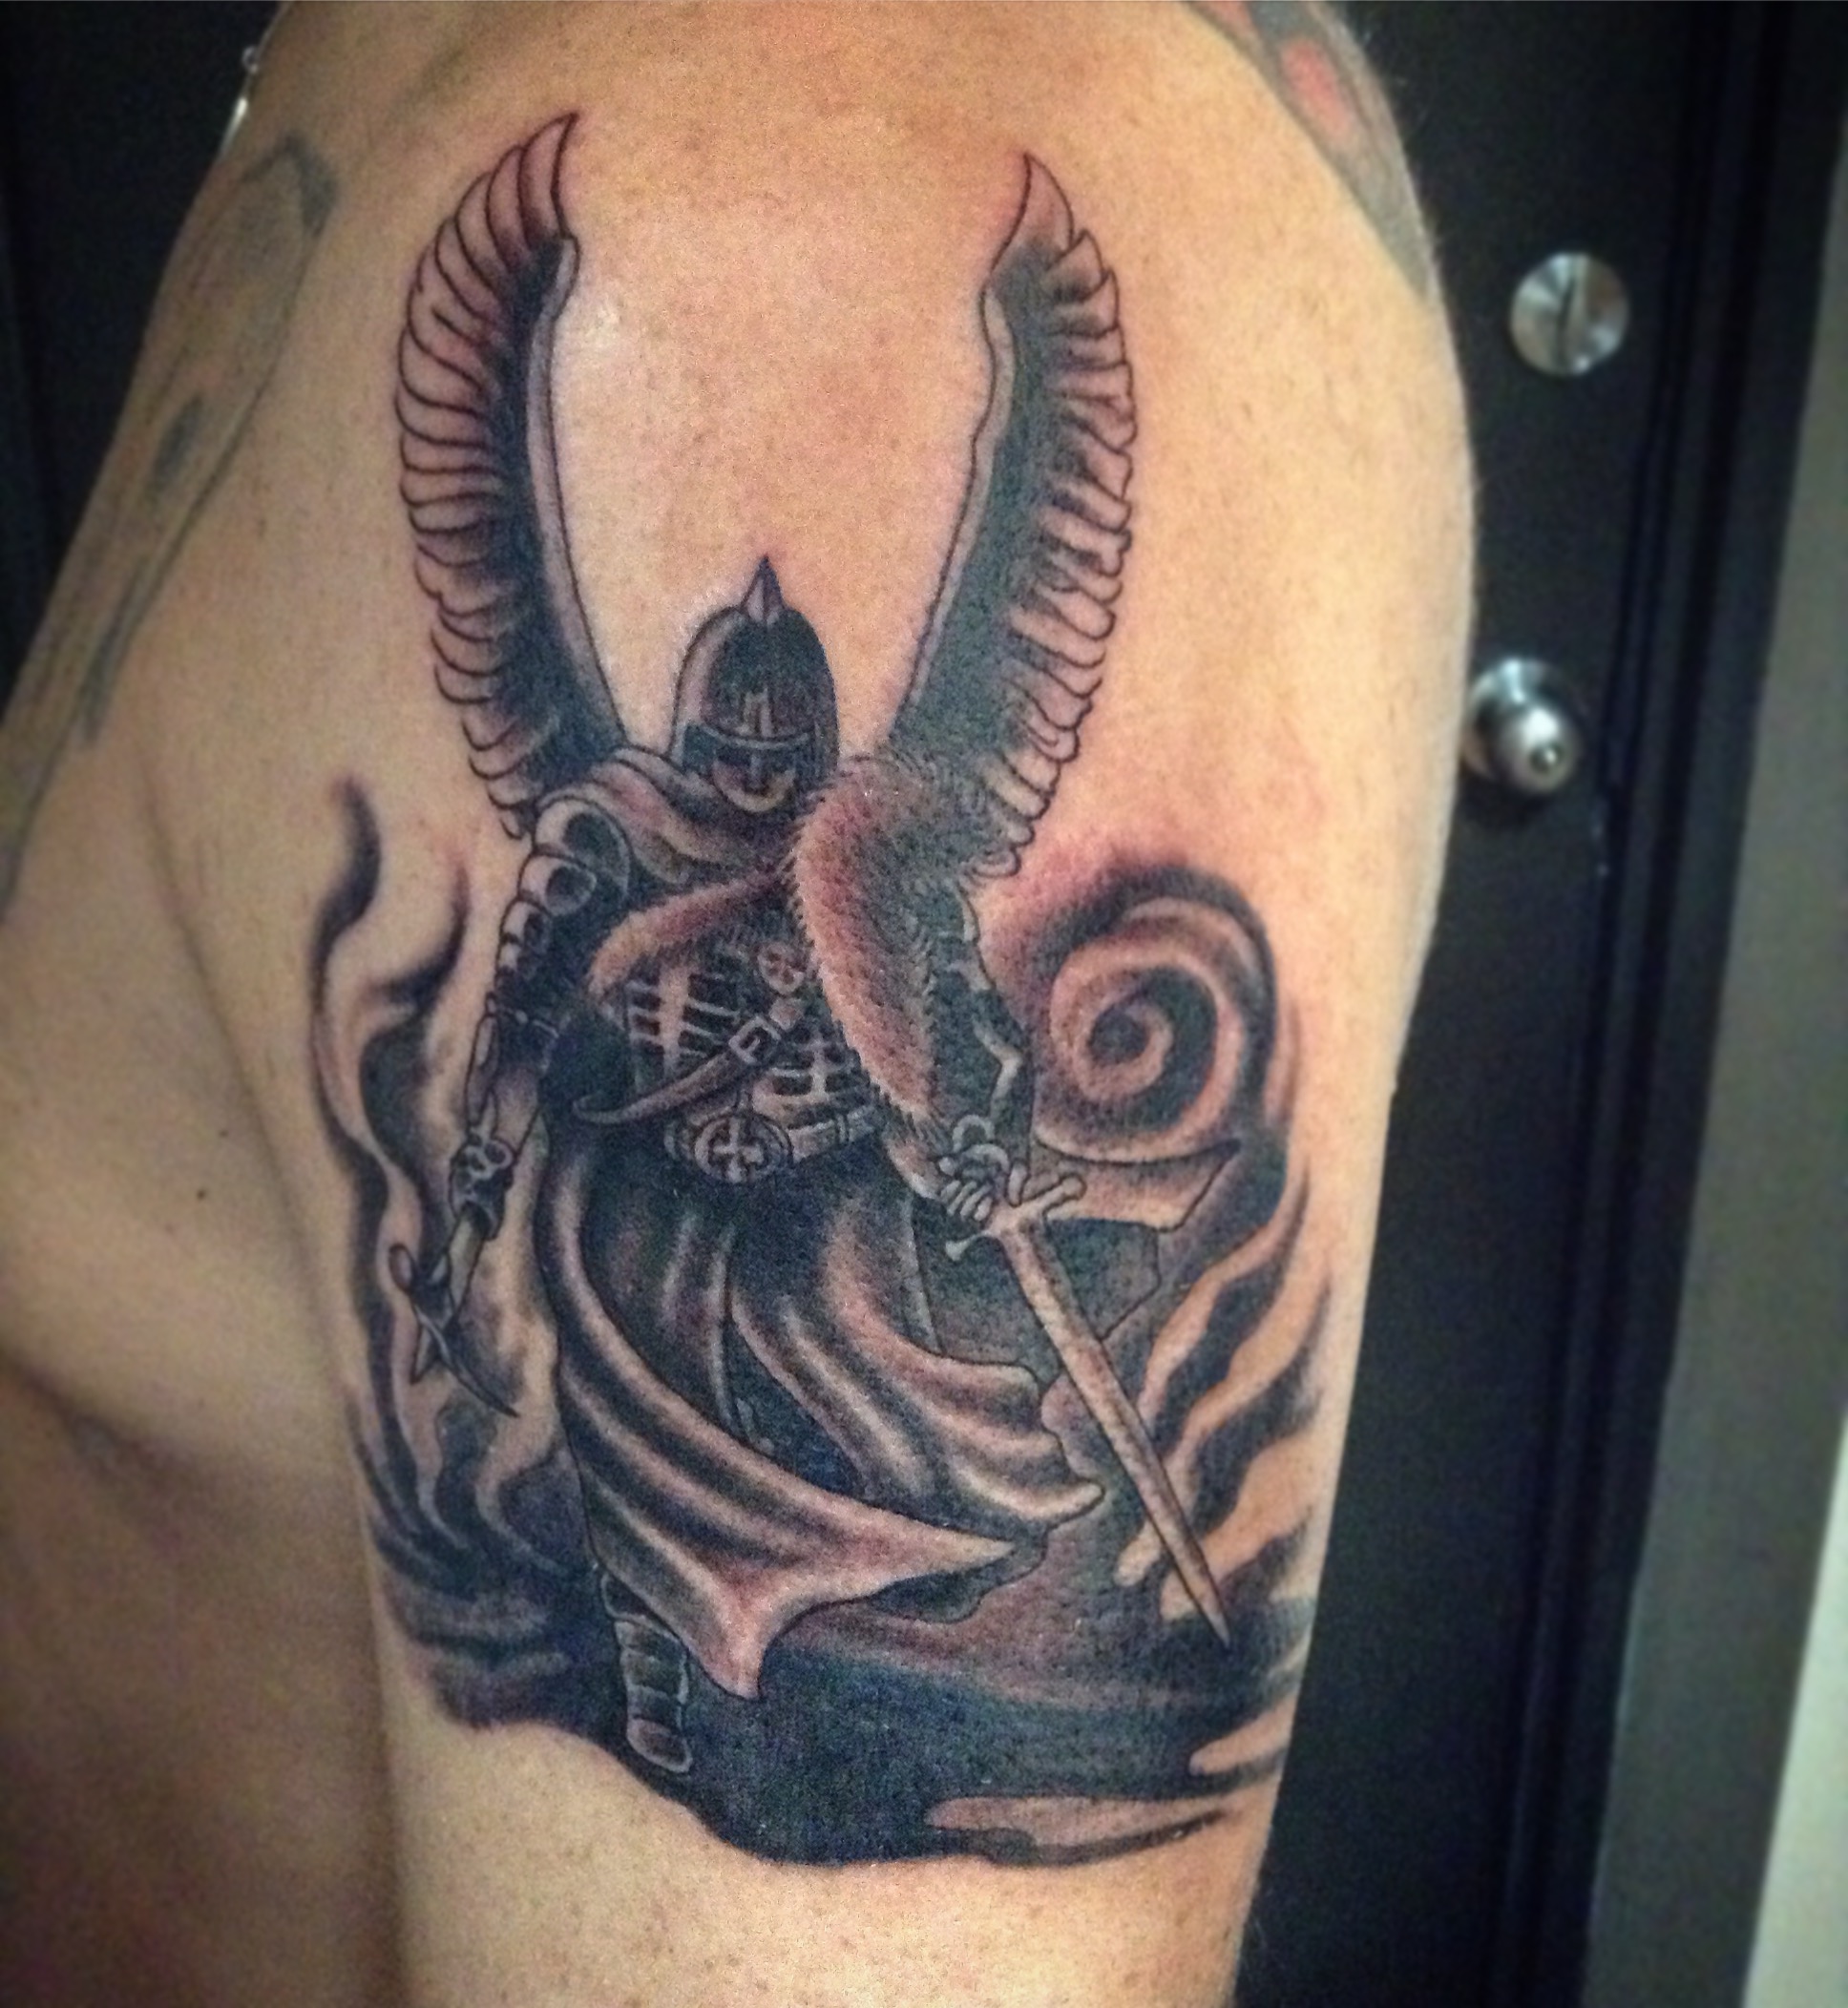 Polish Winged Hussar by Justin Uncle Trashcan at Built For Speed Tattoo  Orlando Fl  Tattoos Polish tattoos Polish hussars